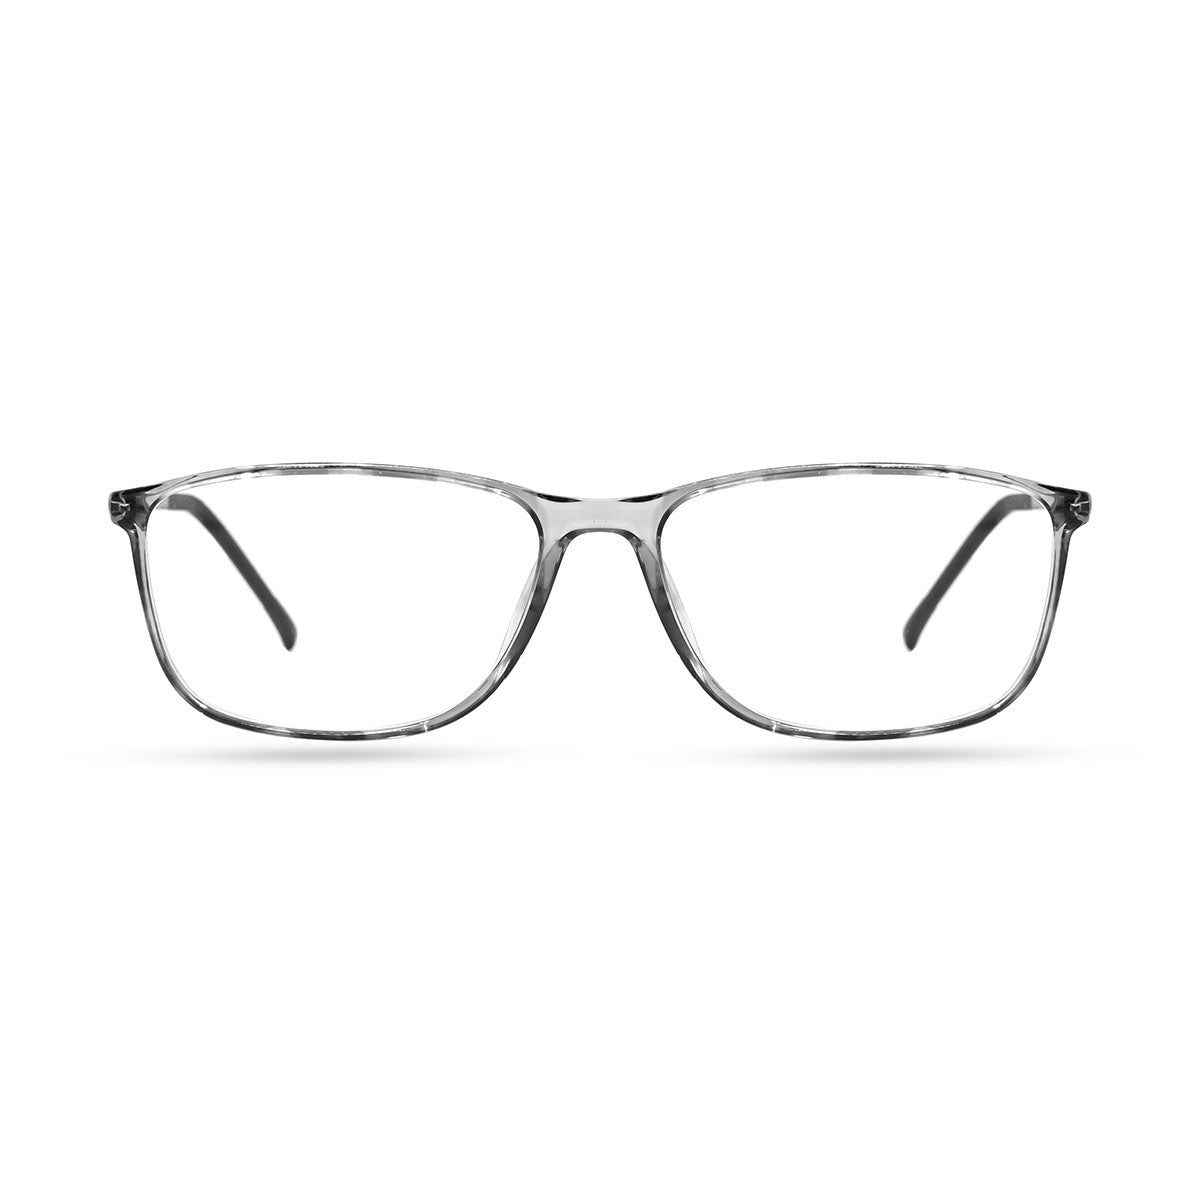 SILHOUETTE SPX 2888 10 6052 spectacle-frame